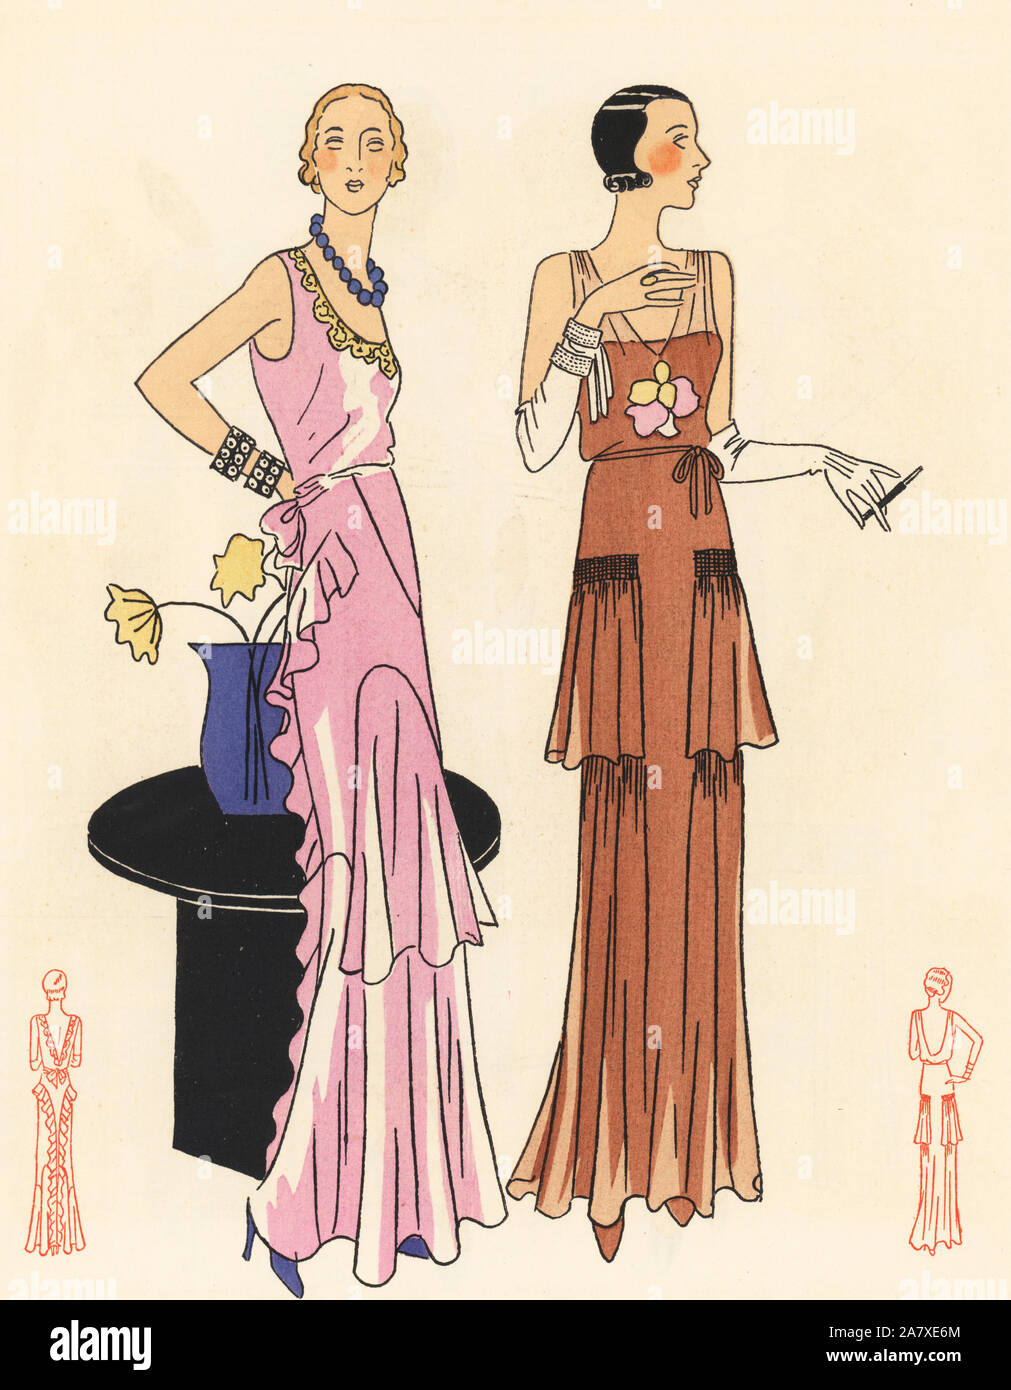 Woman in evening gown of pink crepe faille, and woman smoking a cigarette in evening dress of chiffon. Handcolored pochoir (stencil) lithograph from the French luxury fashion magazine Art, Gout, Beaute, 1931. Stock Photo